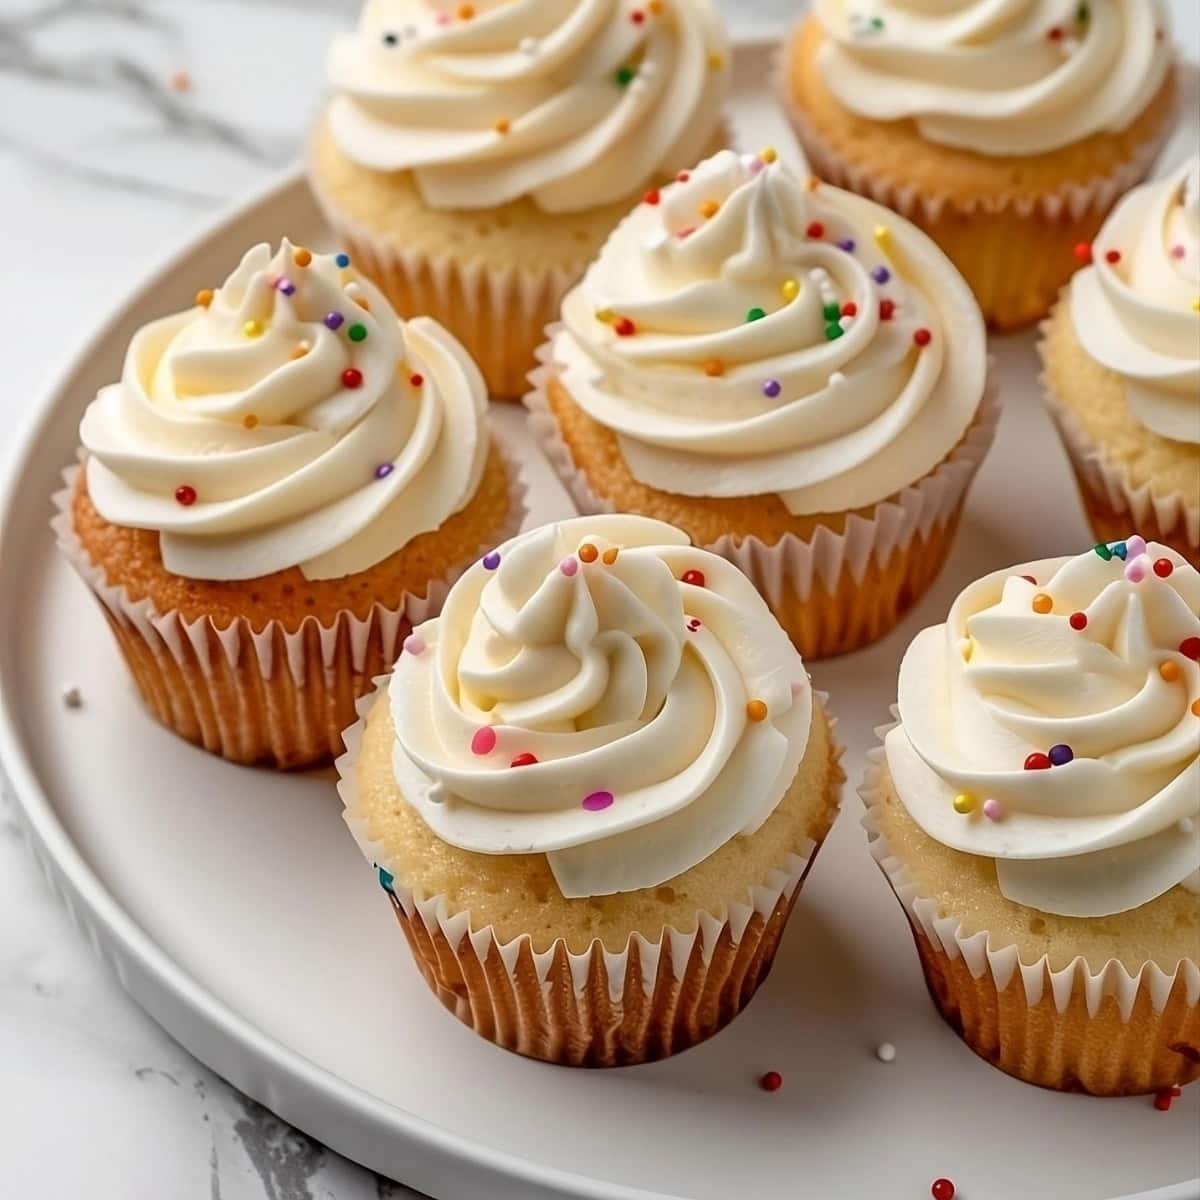 Vanilla cupcake with frosting garnished with sprinkles arranged in a plate.